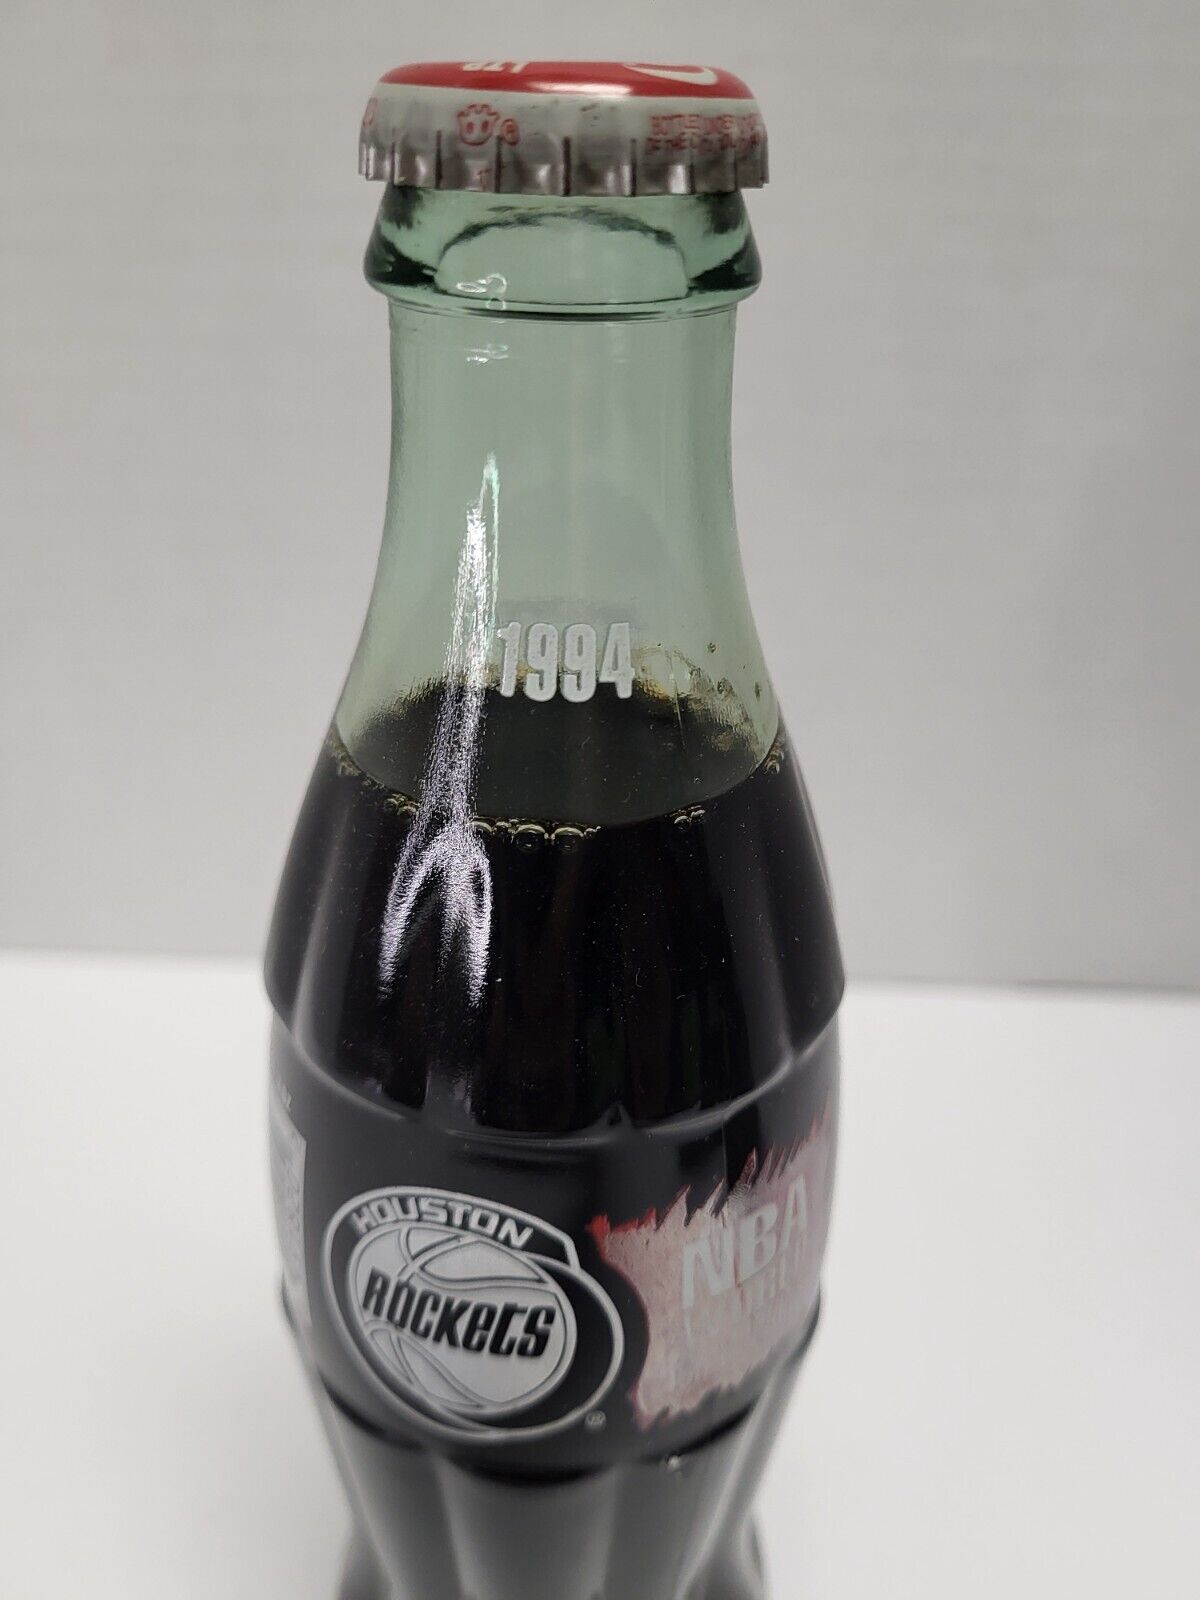 Houston Rockets Collectors First Championship edition Coke bottle Sealed NBA